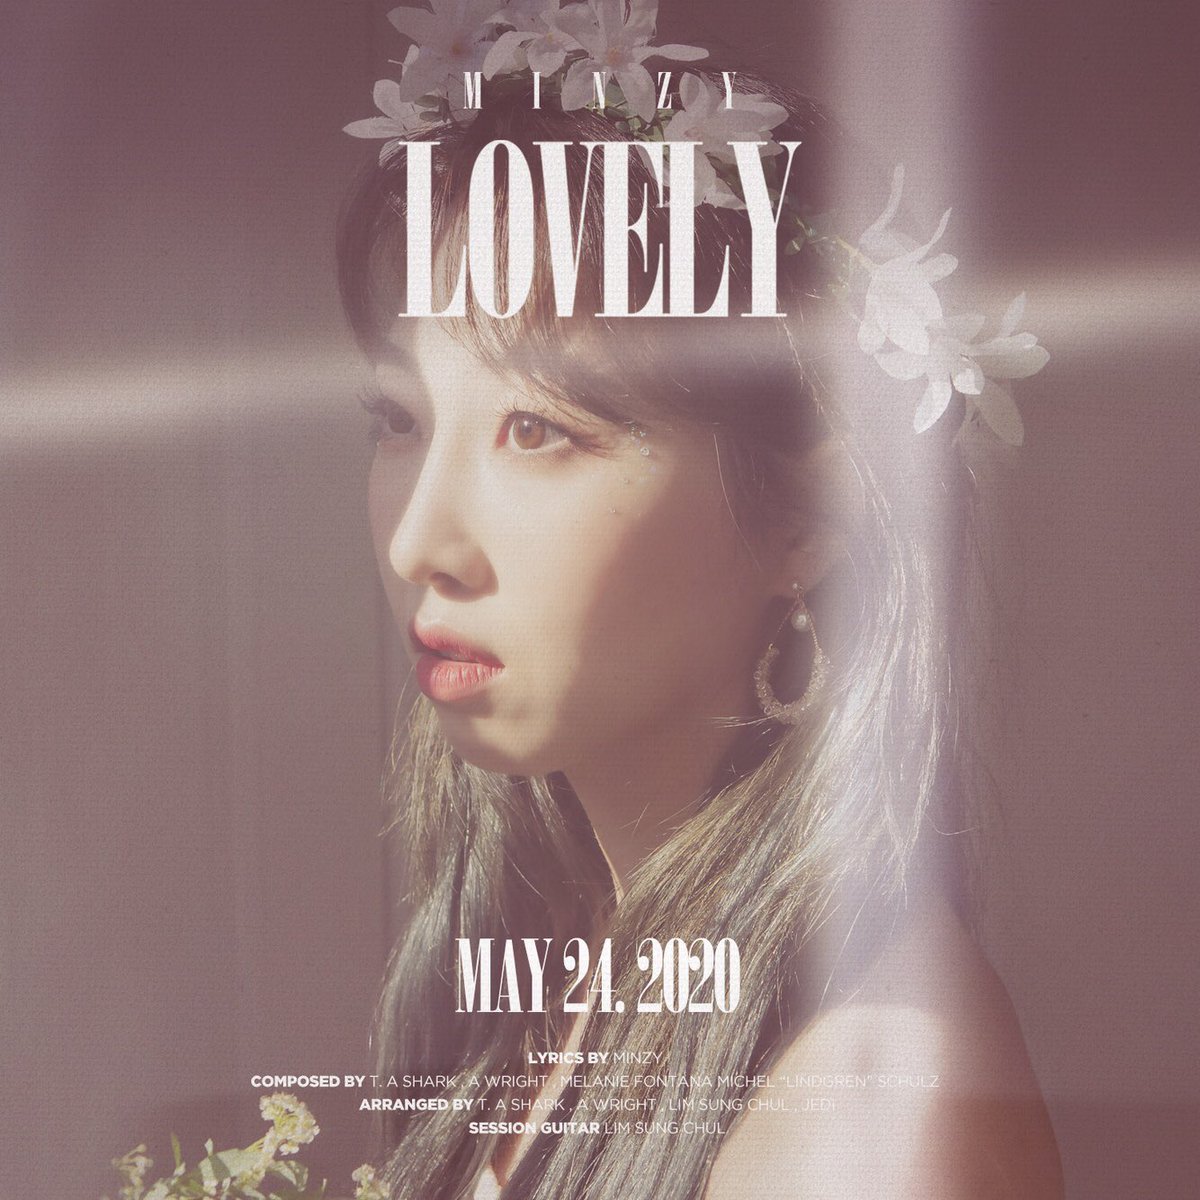 Background info of the producers of Minzy’s ‘LOVELY’: